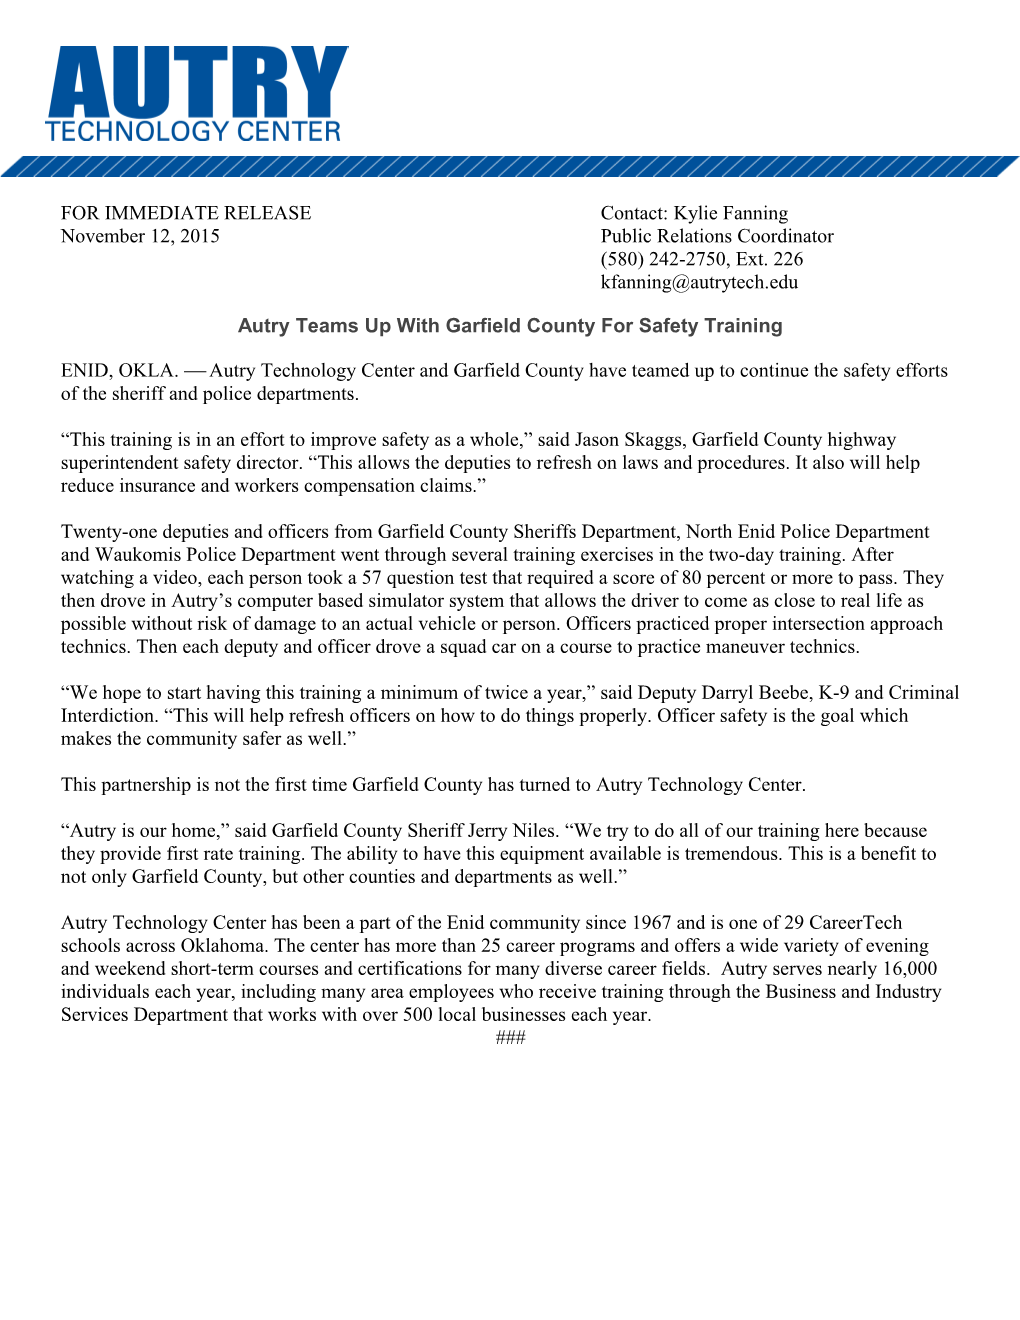 Autry Teams up with Garfield County for Safety Training